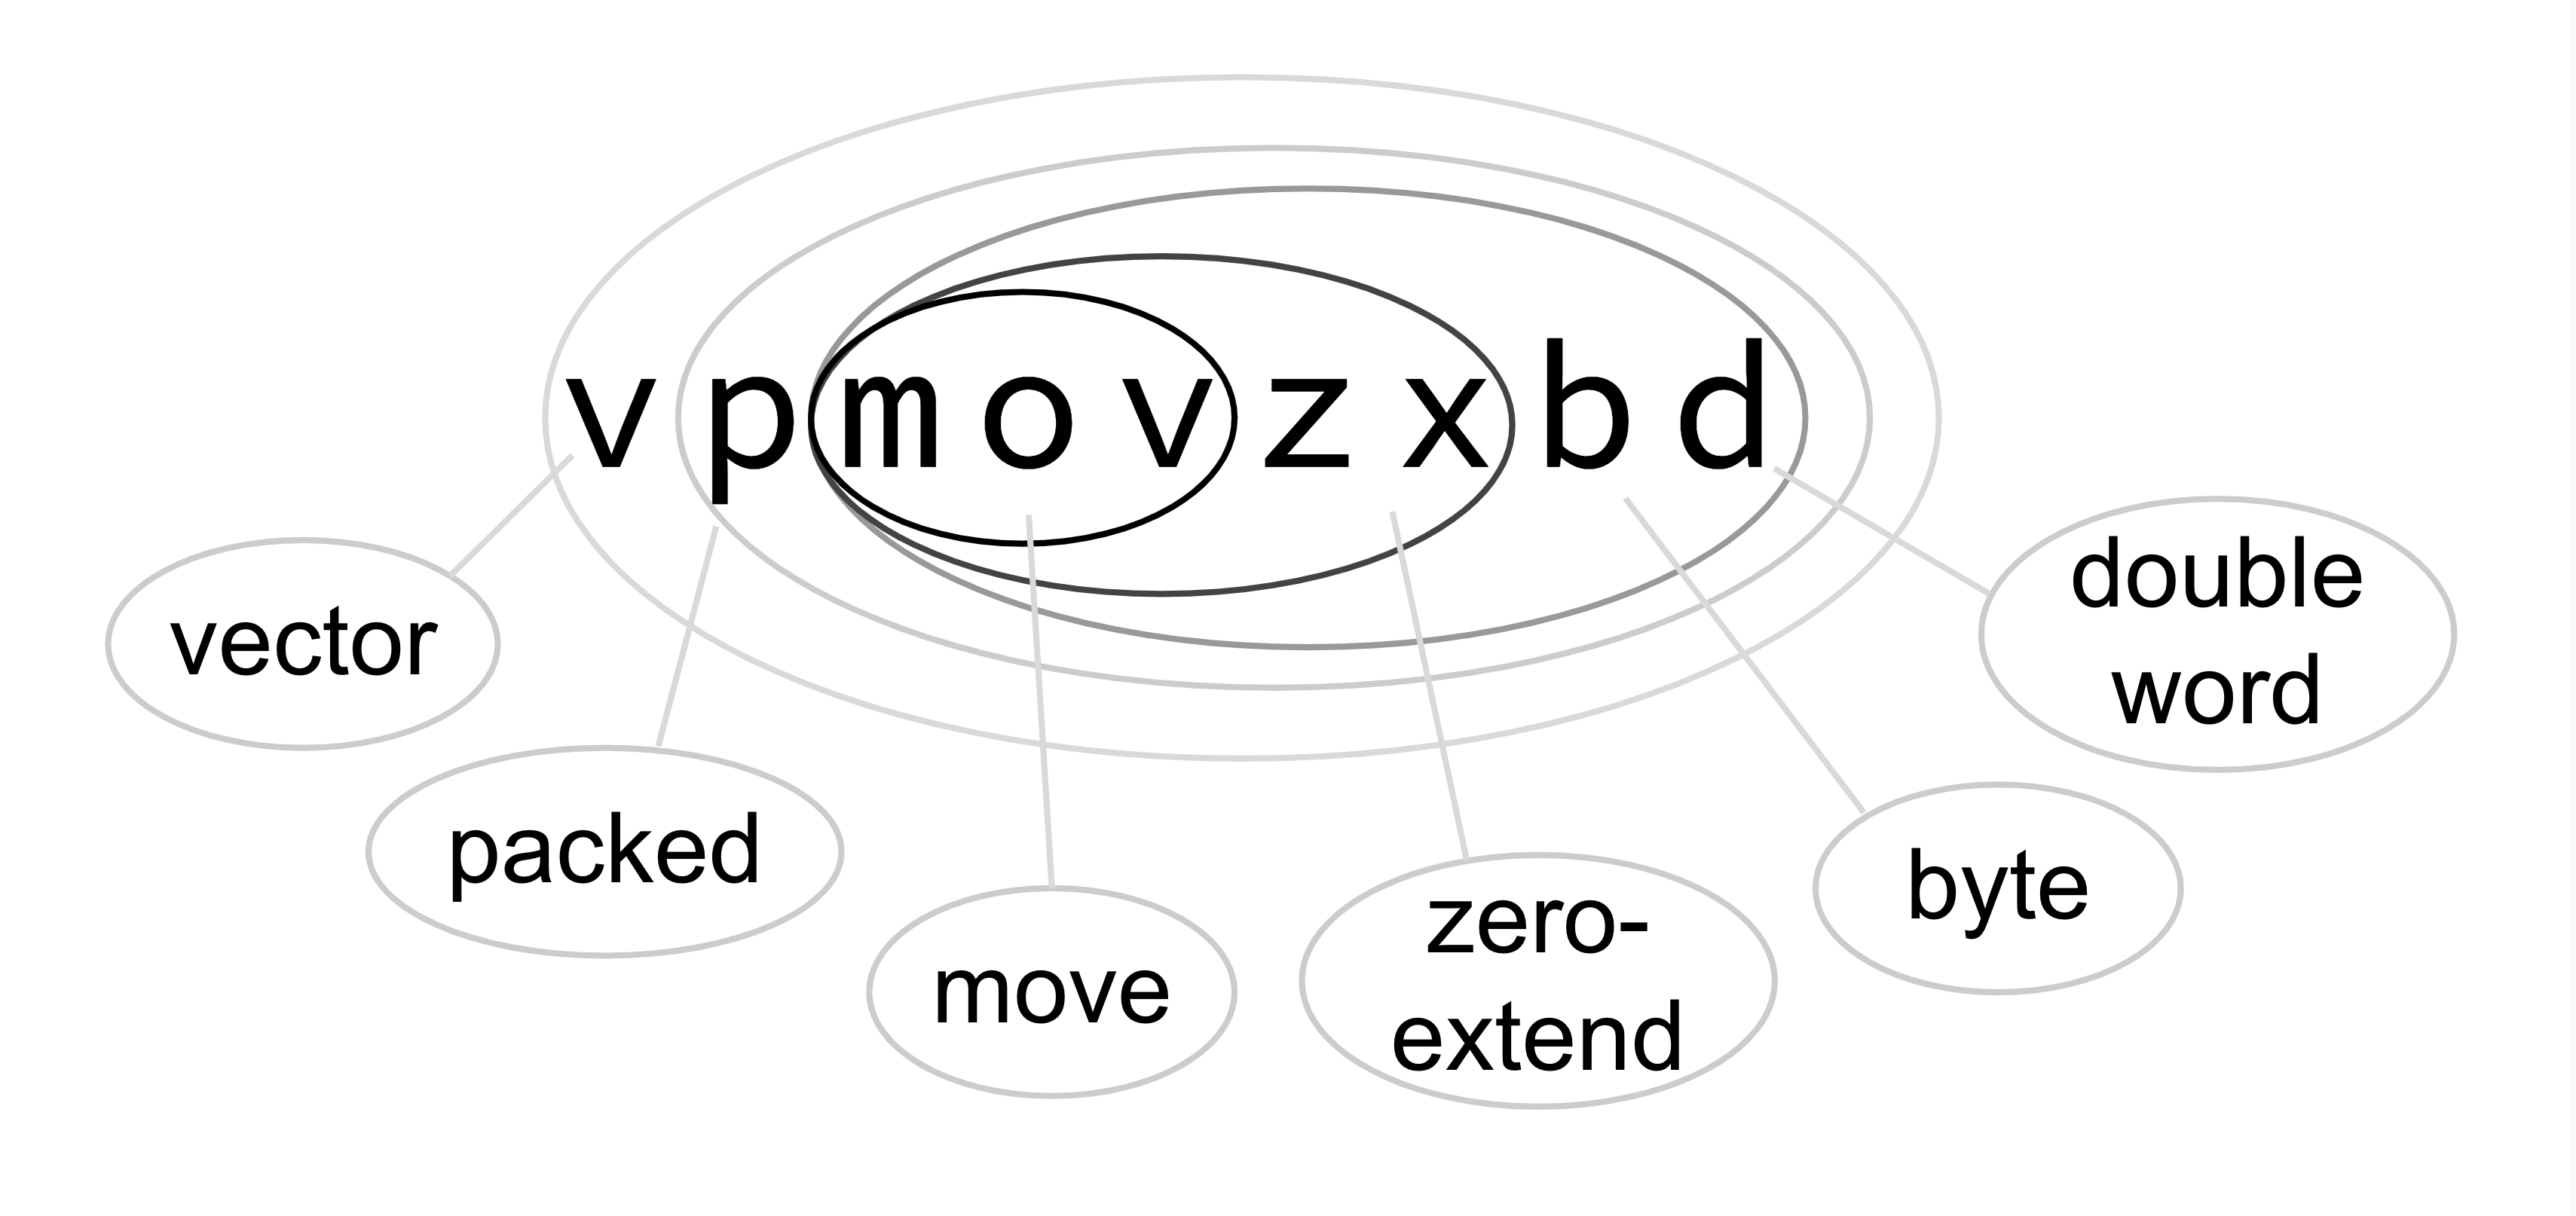 Diagram shows how the mnemonic vpmovzxbd decomposes into parts.